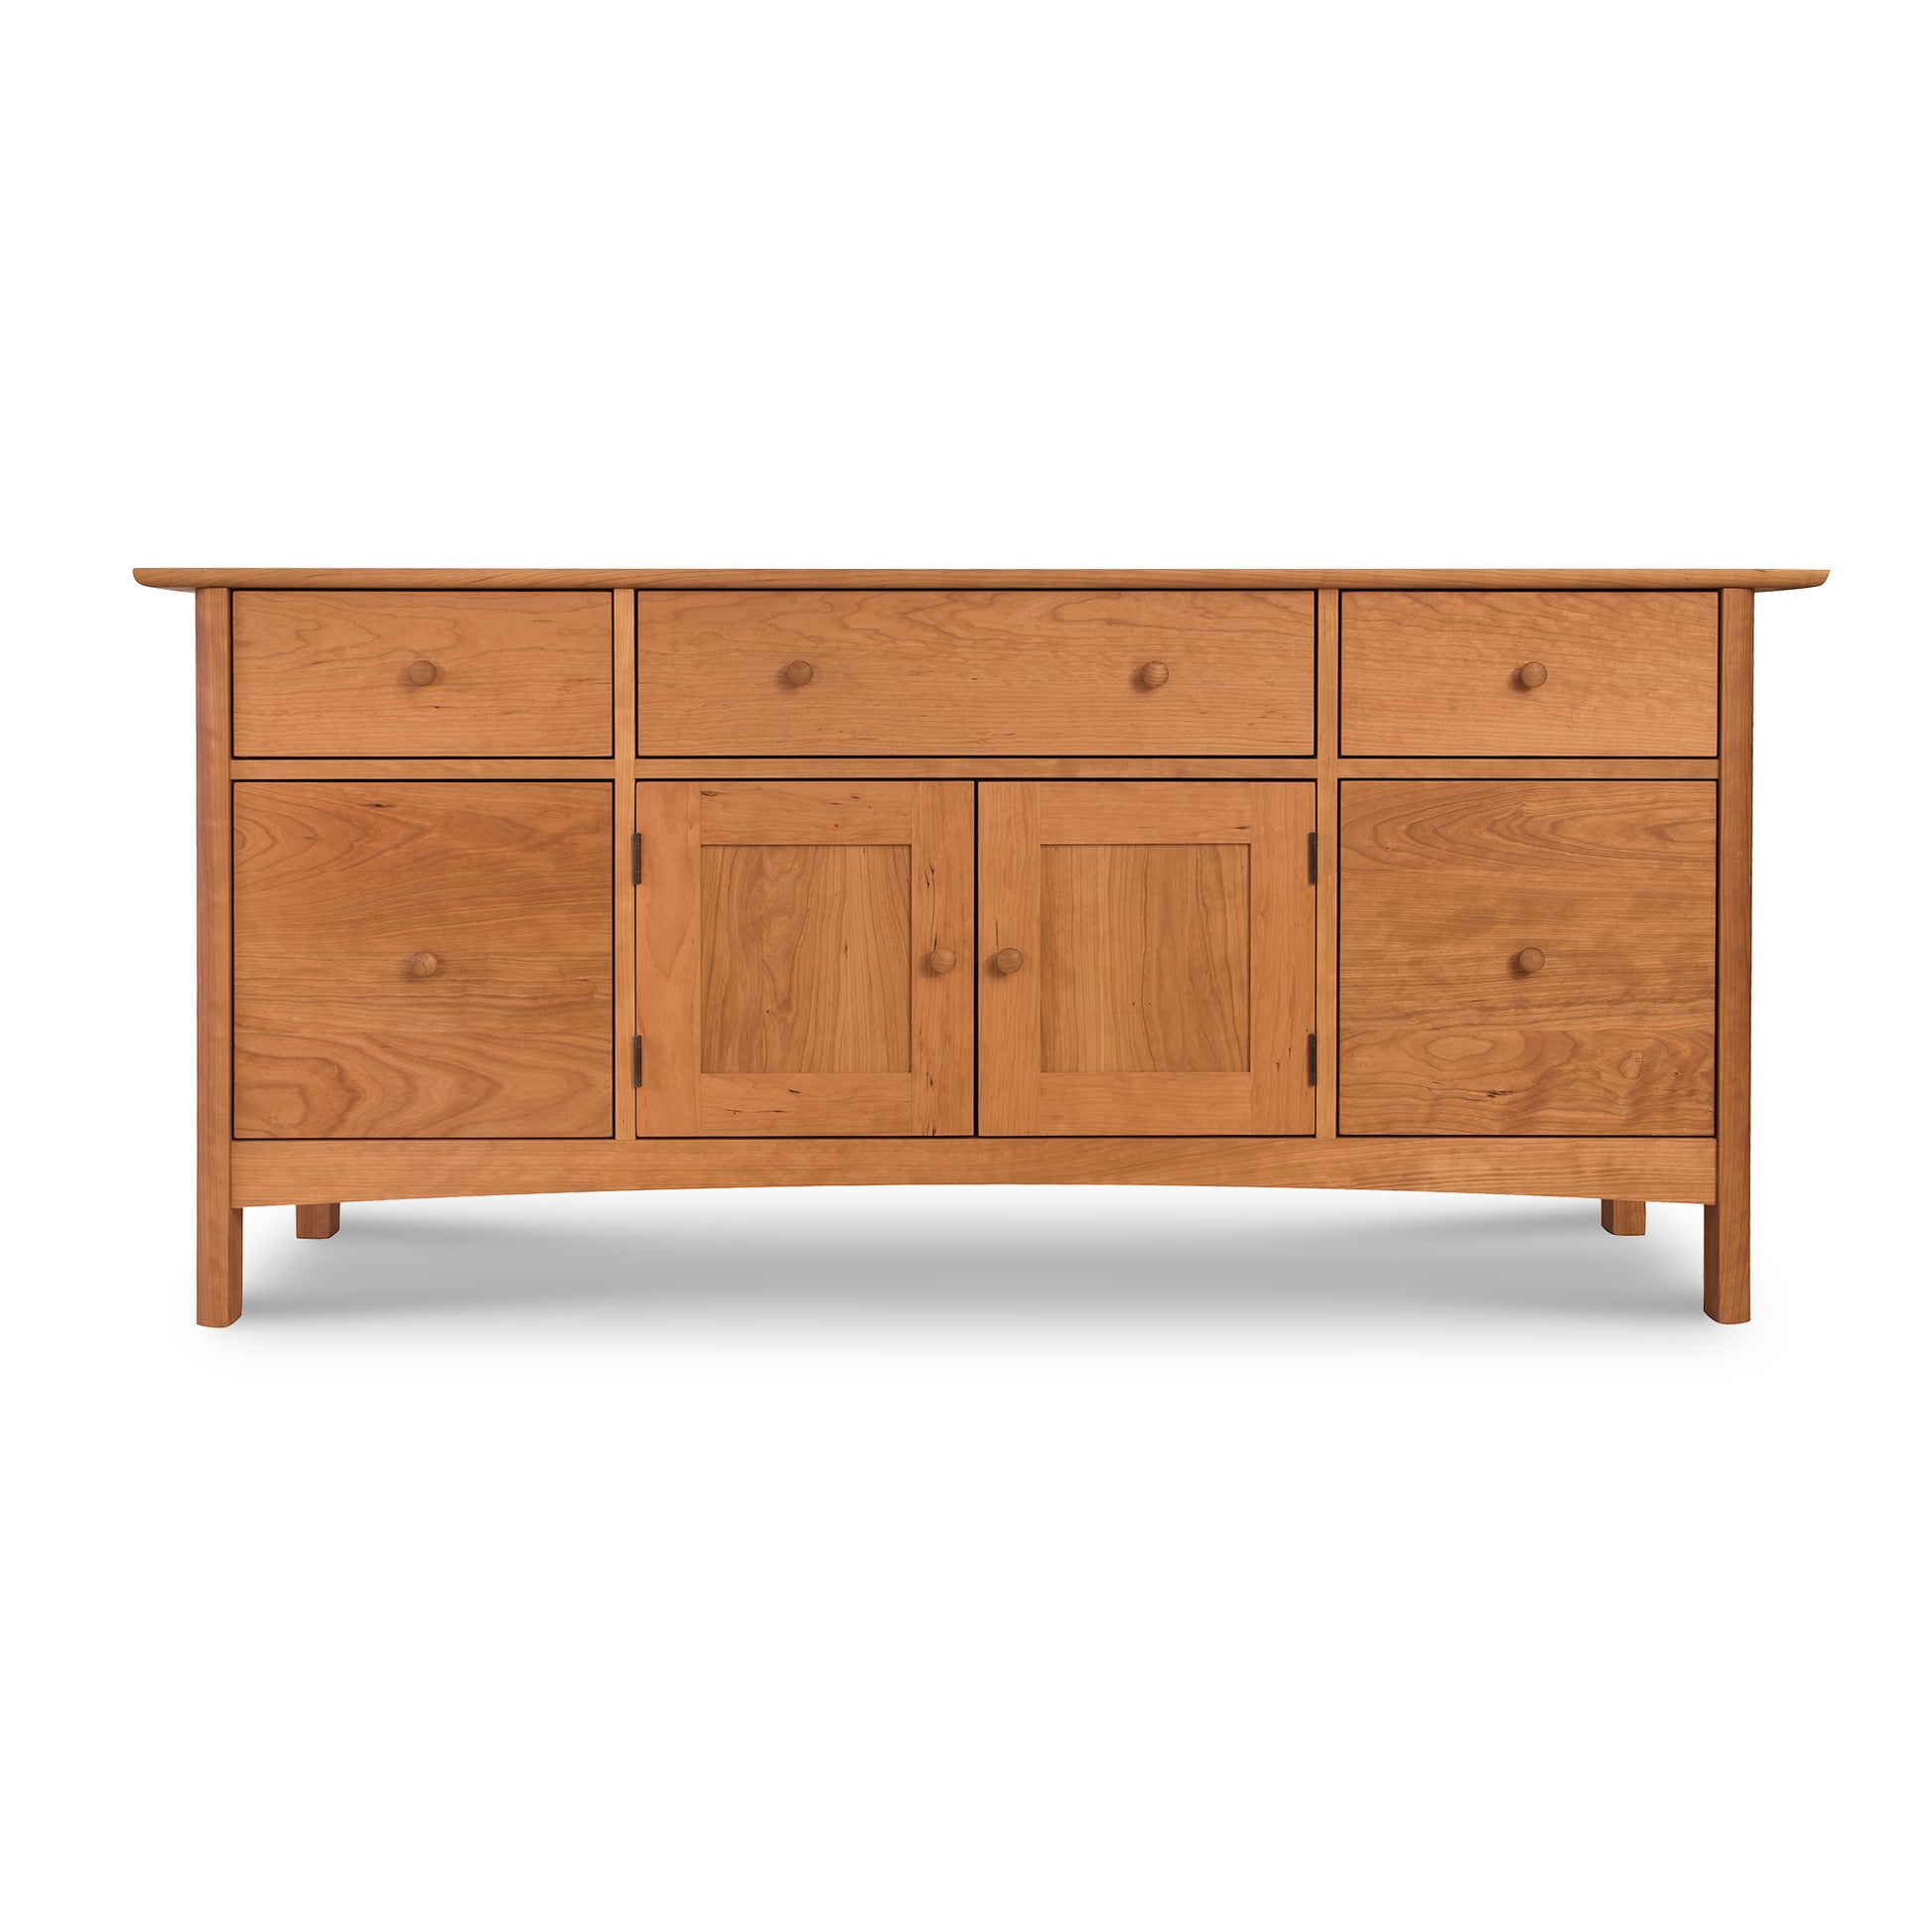 A luxury, handmade Heartwood Shaker File Credenza with drawers and doors in a shaker style by Vermont Furniture Designs.